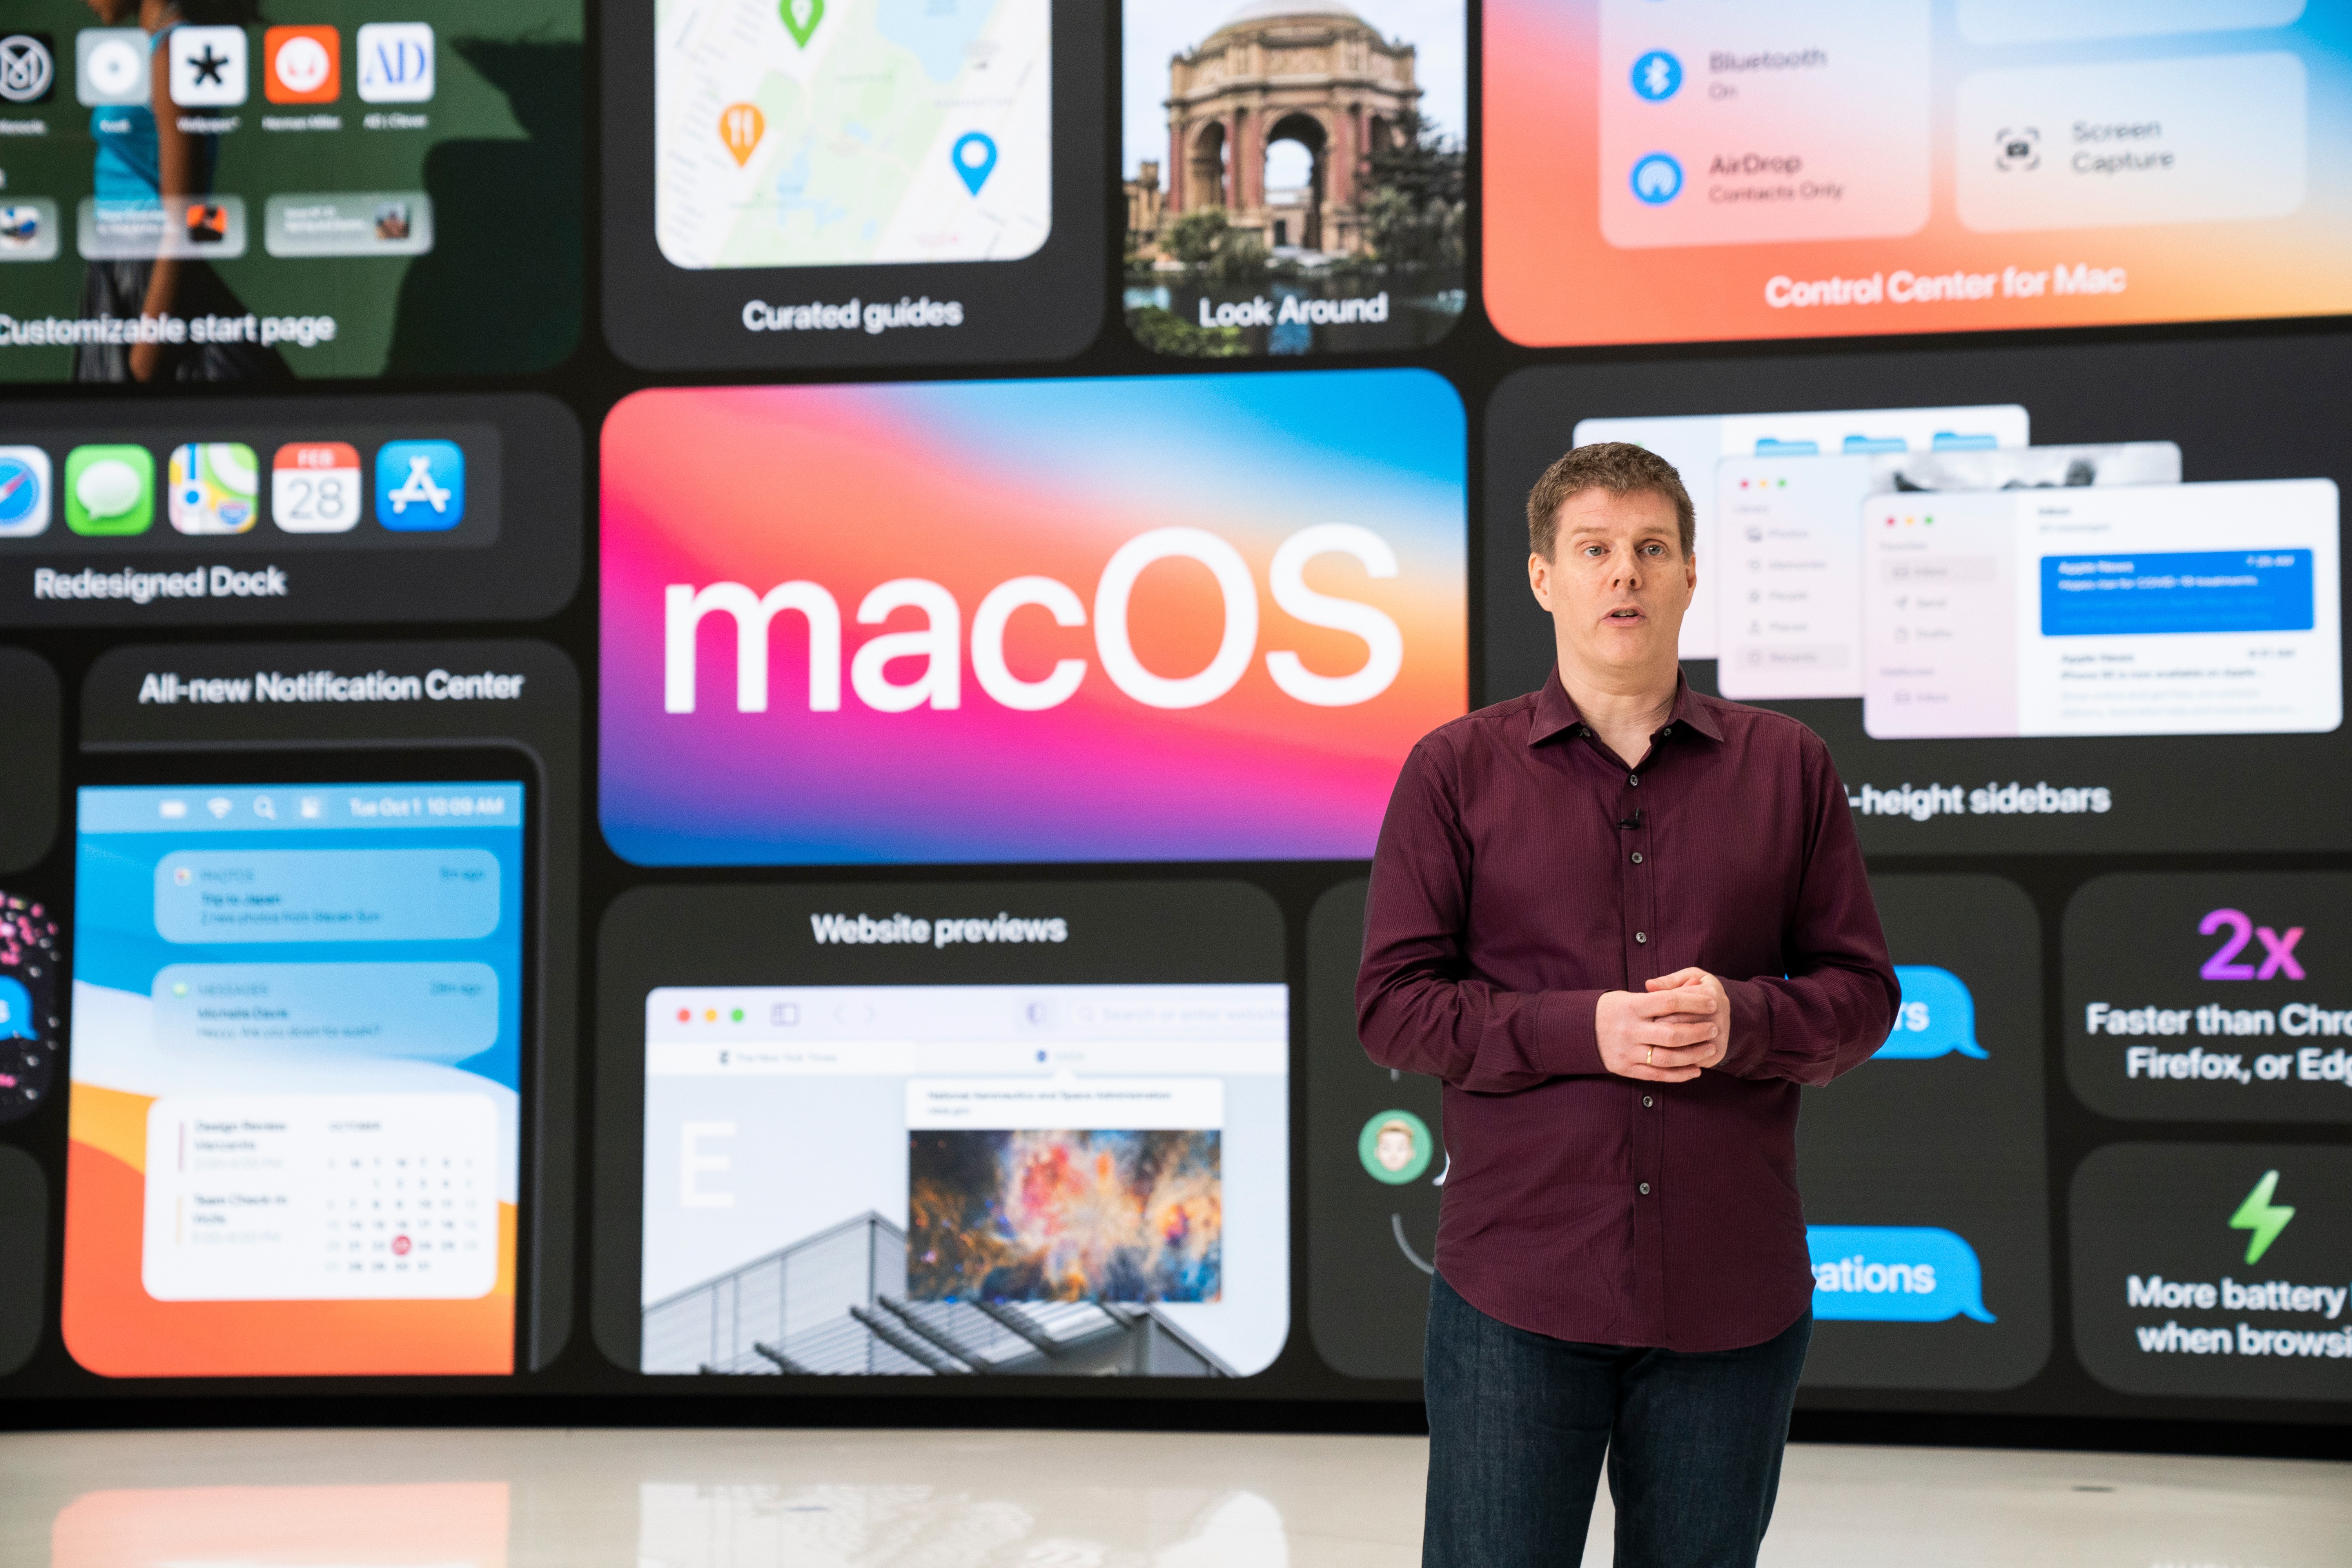 WWDC brought a lot of exciting Mac changes.